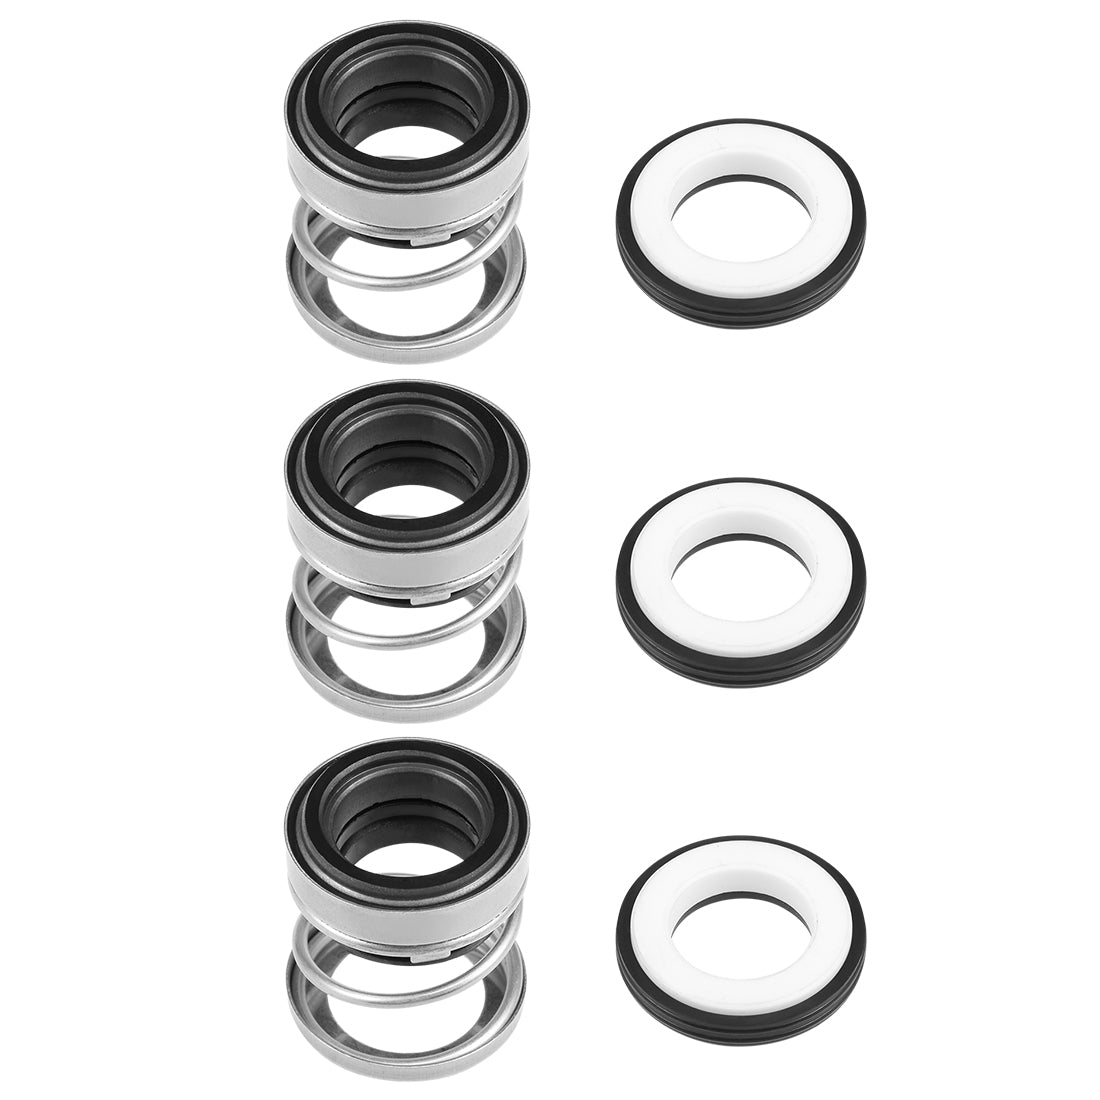 uxcell Uxcell Mechanical Shaft Seal Replacement for Pool Spa Pump 3pcs 108-14